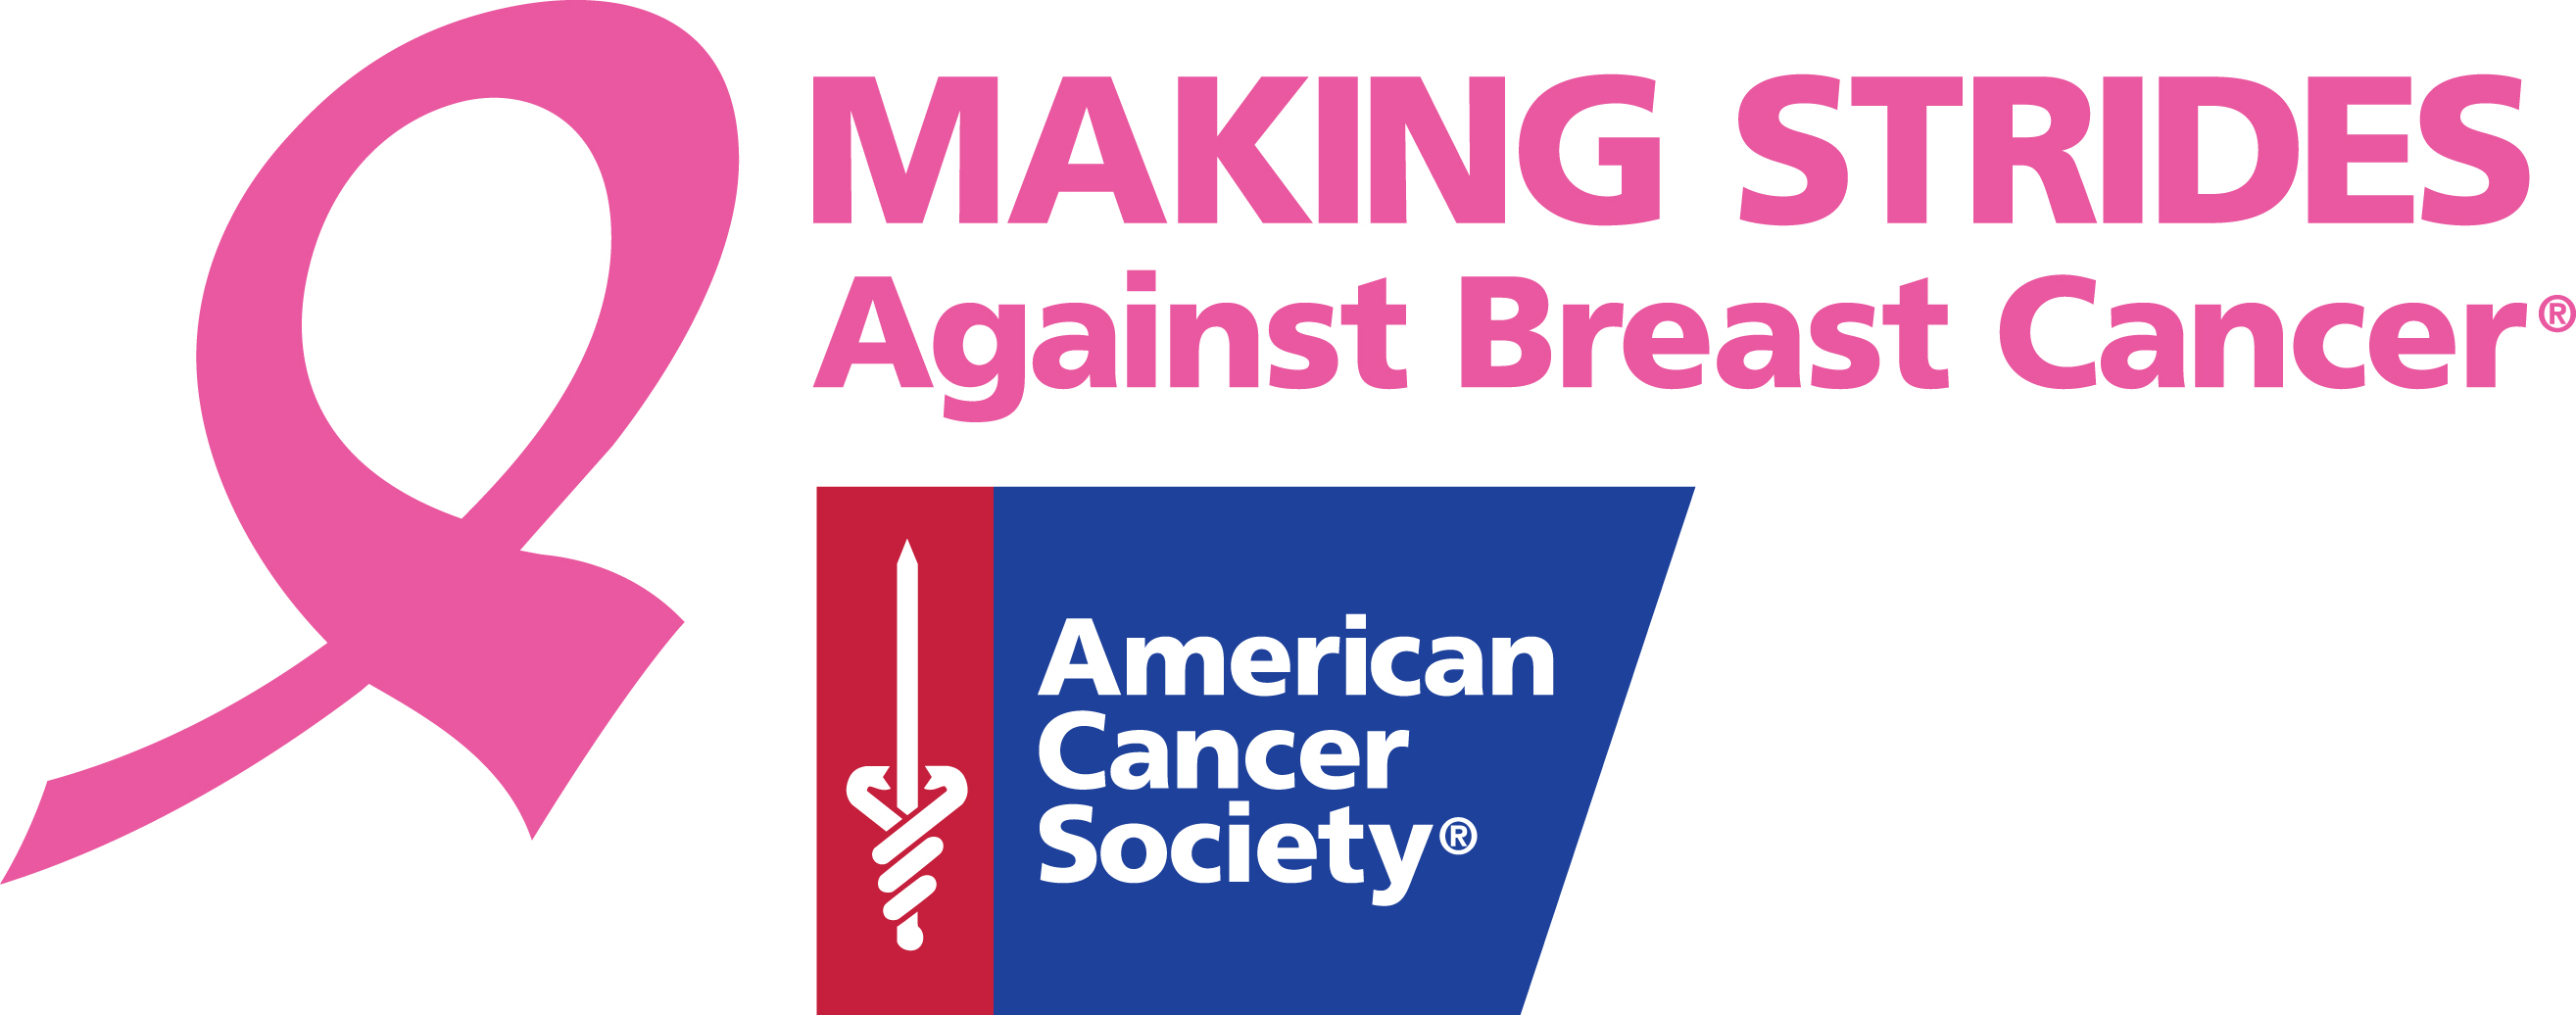 A Portion of Event Proceeds will Benefit American Cancer Society